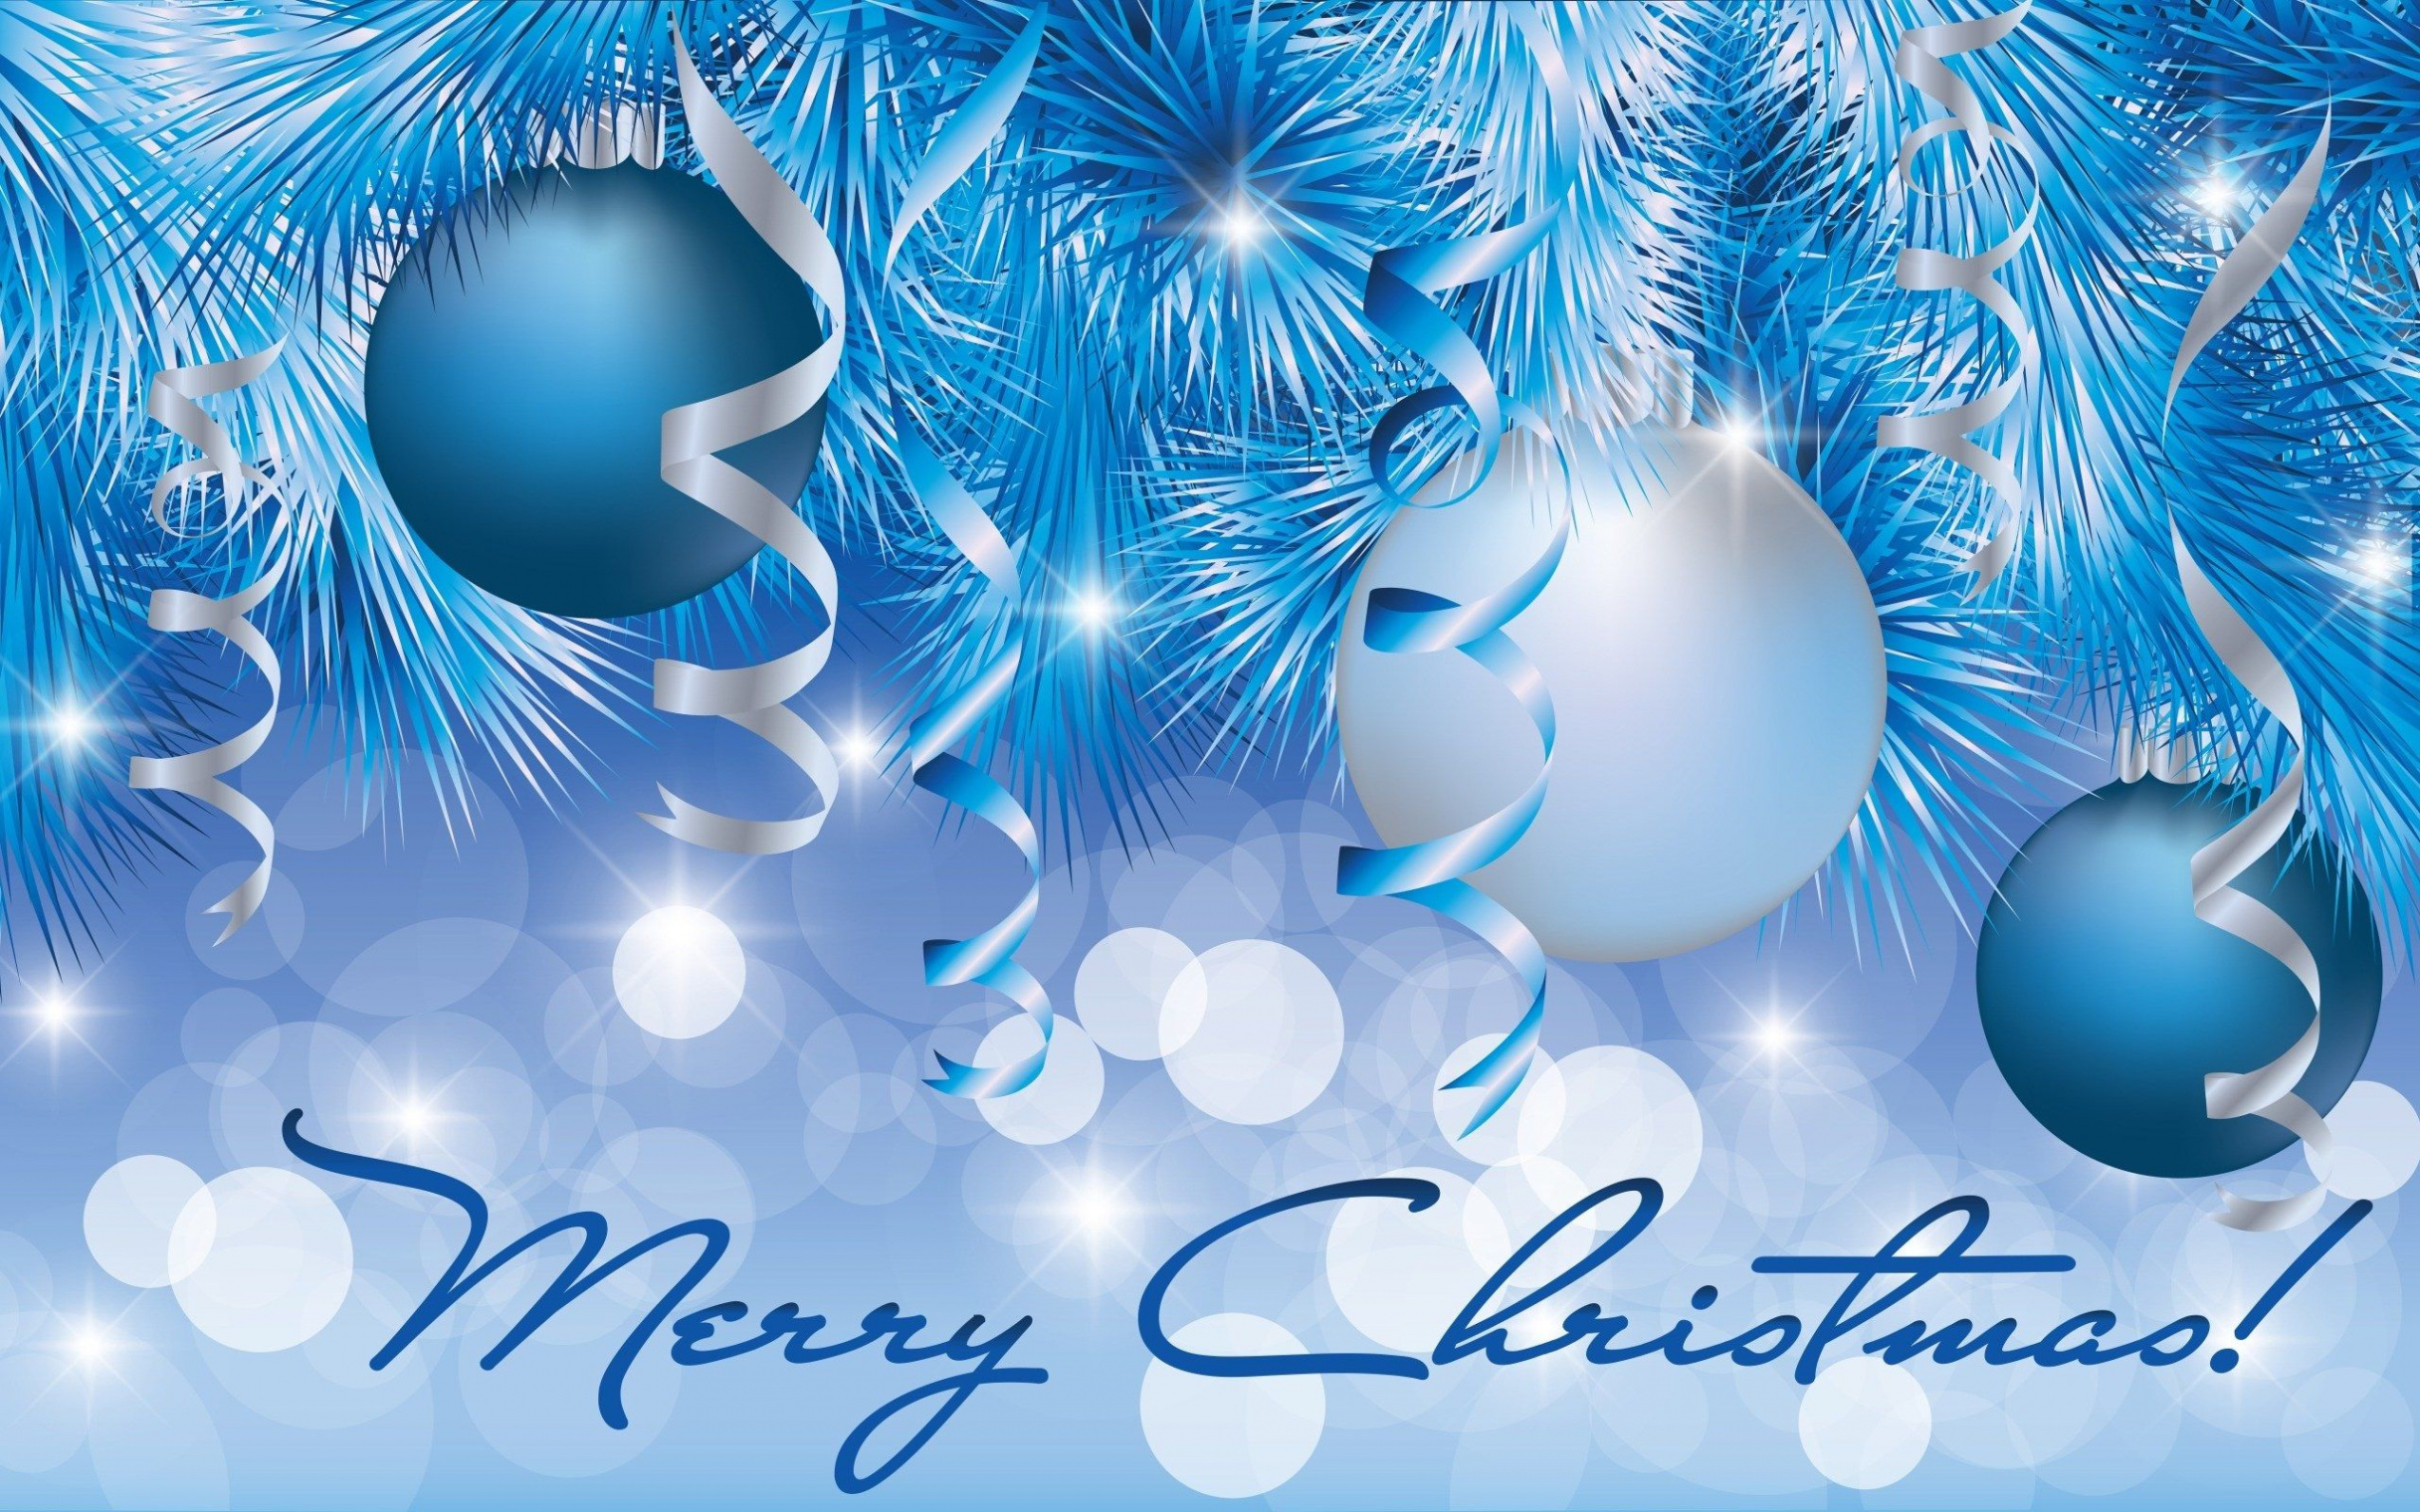 Blue And Silver Christmas wallpaper  Merry christmas wallpaper